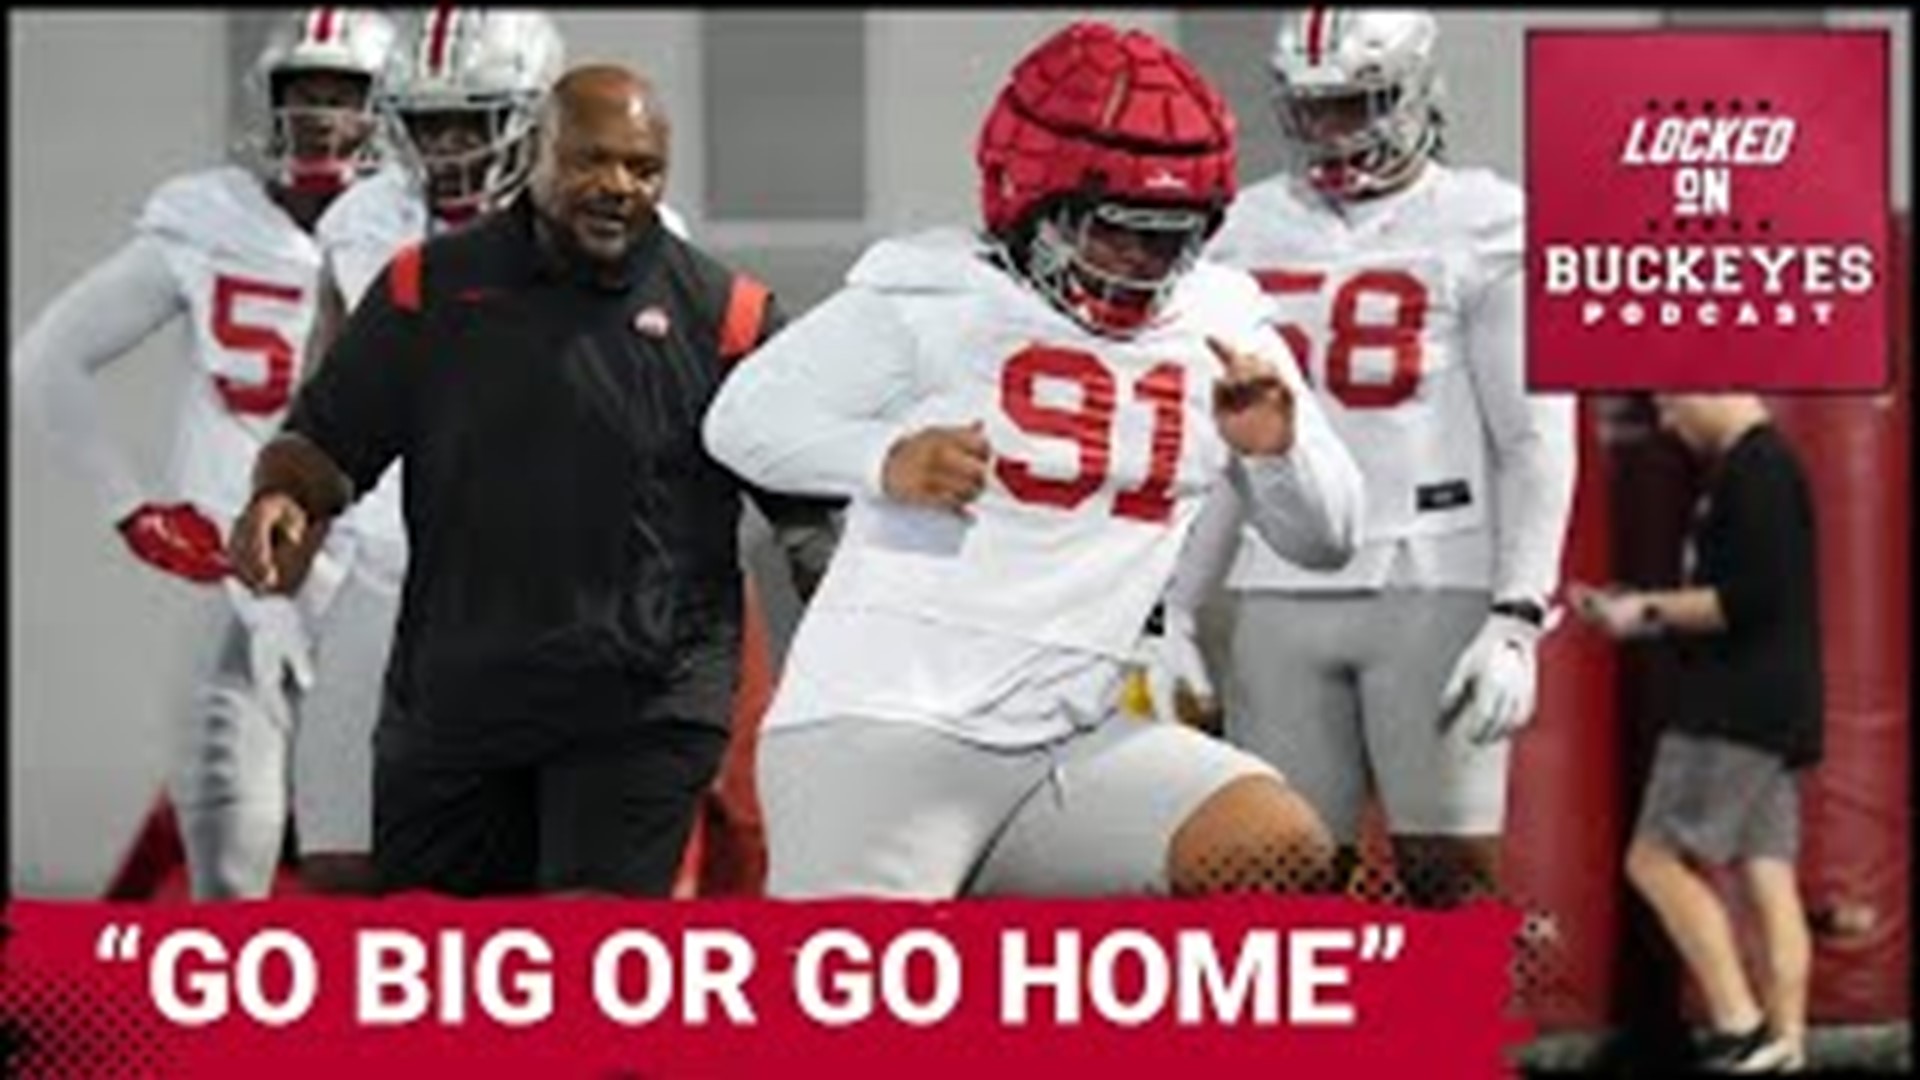 Go big or go home is a common phrase in sports. It's normally not one we hear at Ohio State. Tyleik Williams recently changed the trend when he used it in a presser.